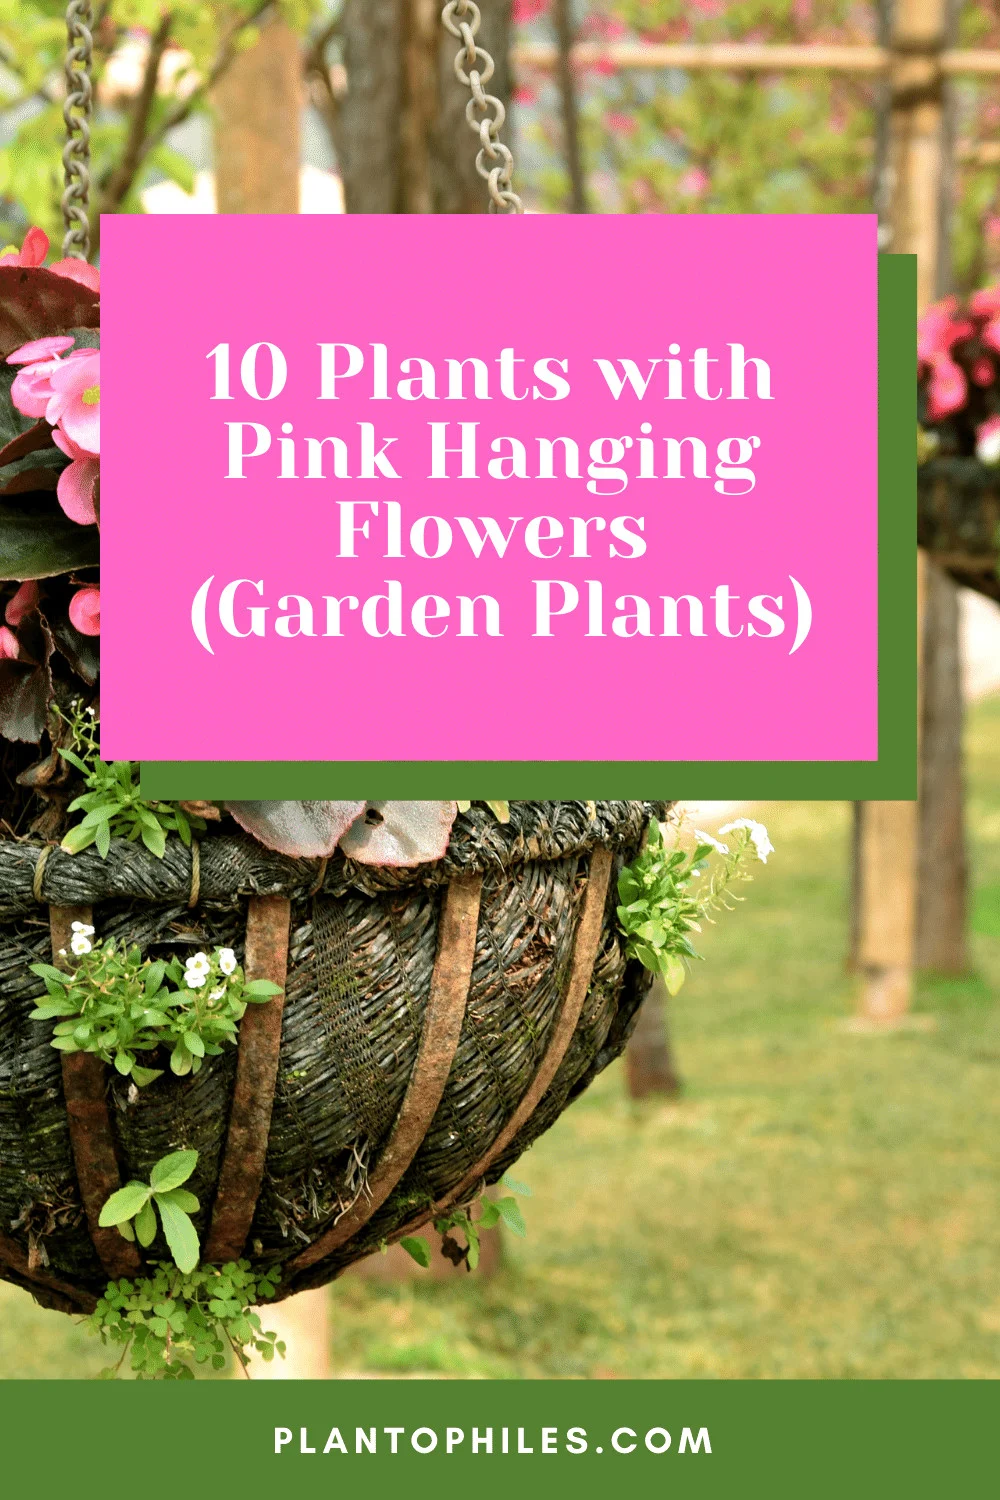 10 Plants with Pink Hanging Flowers (Garden Plants)